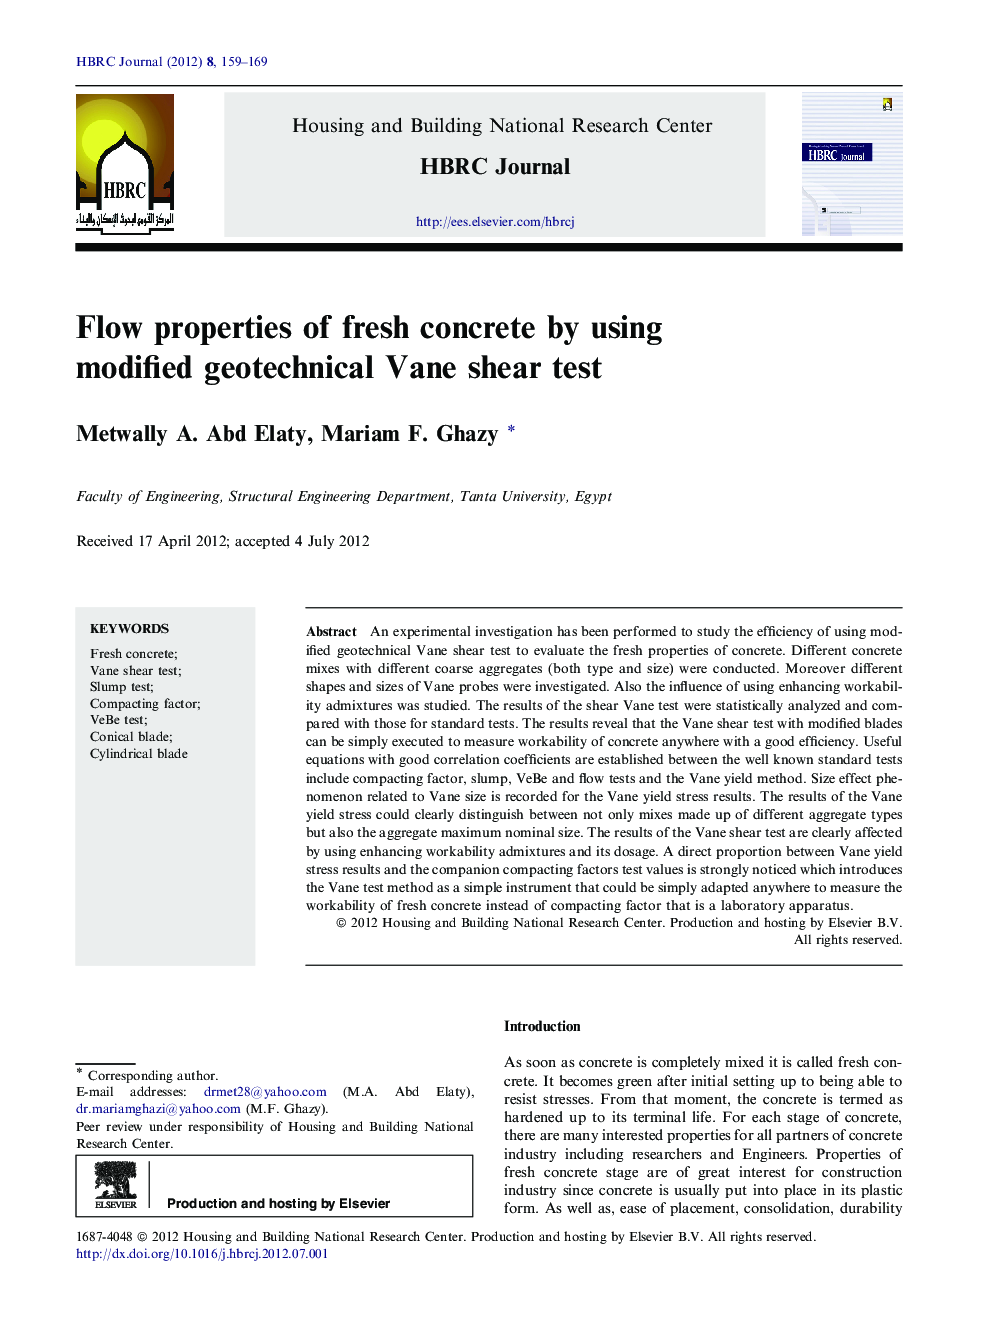 Flow properties of fresh concrete by using modified geotechnical Vane shear test 